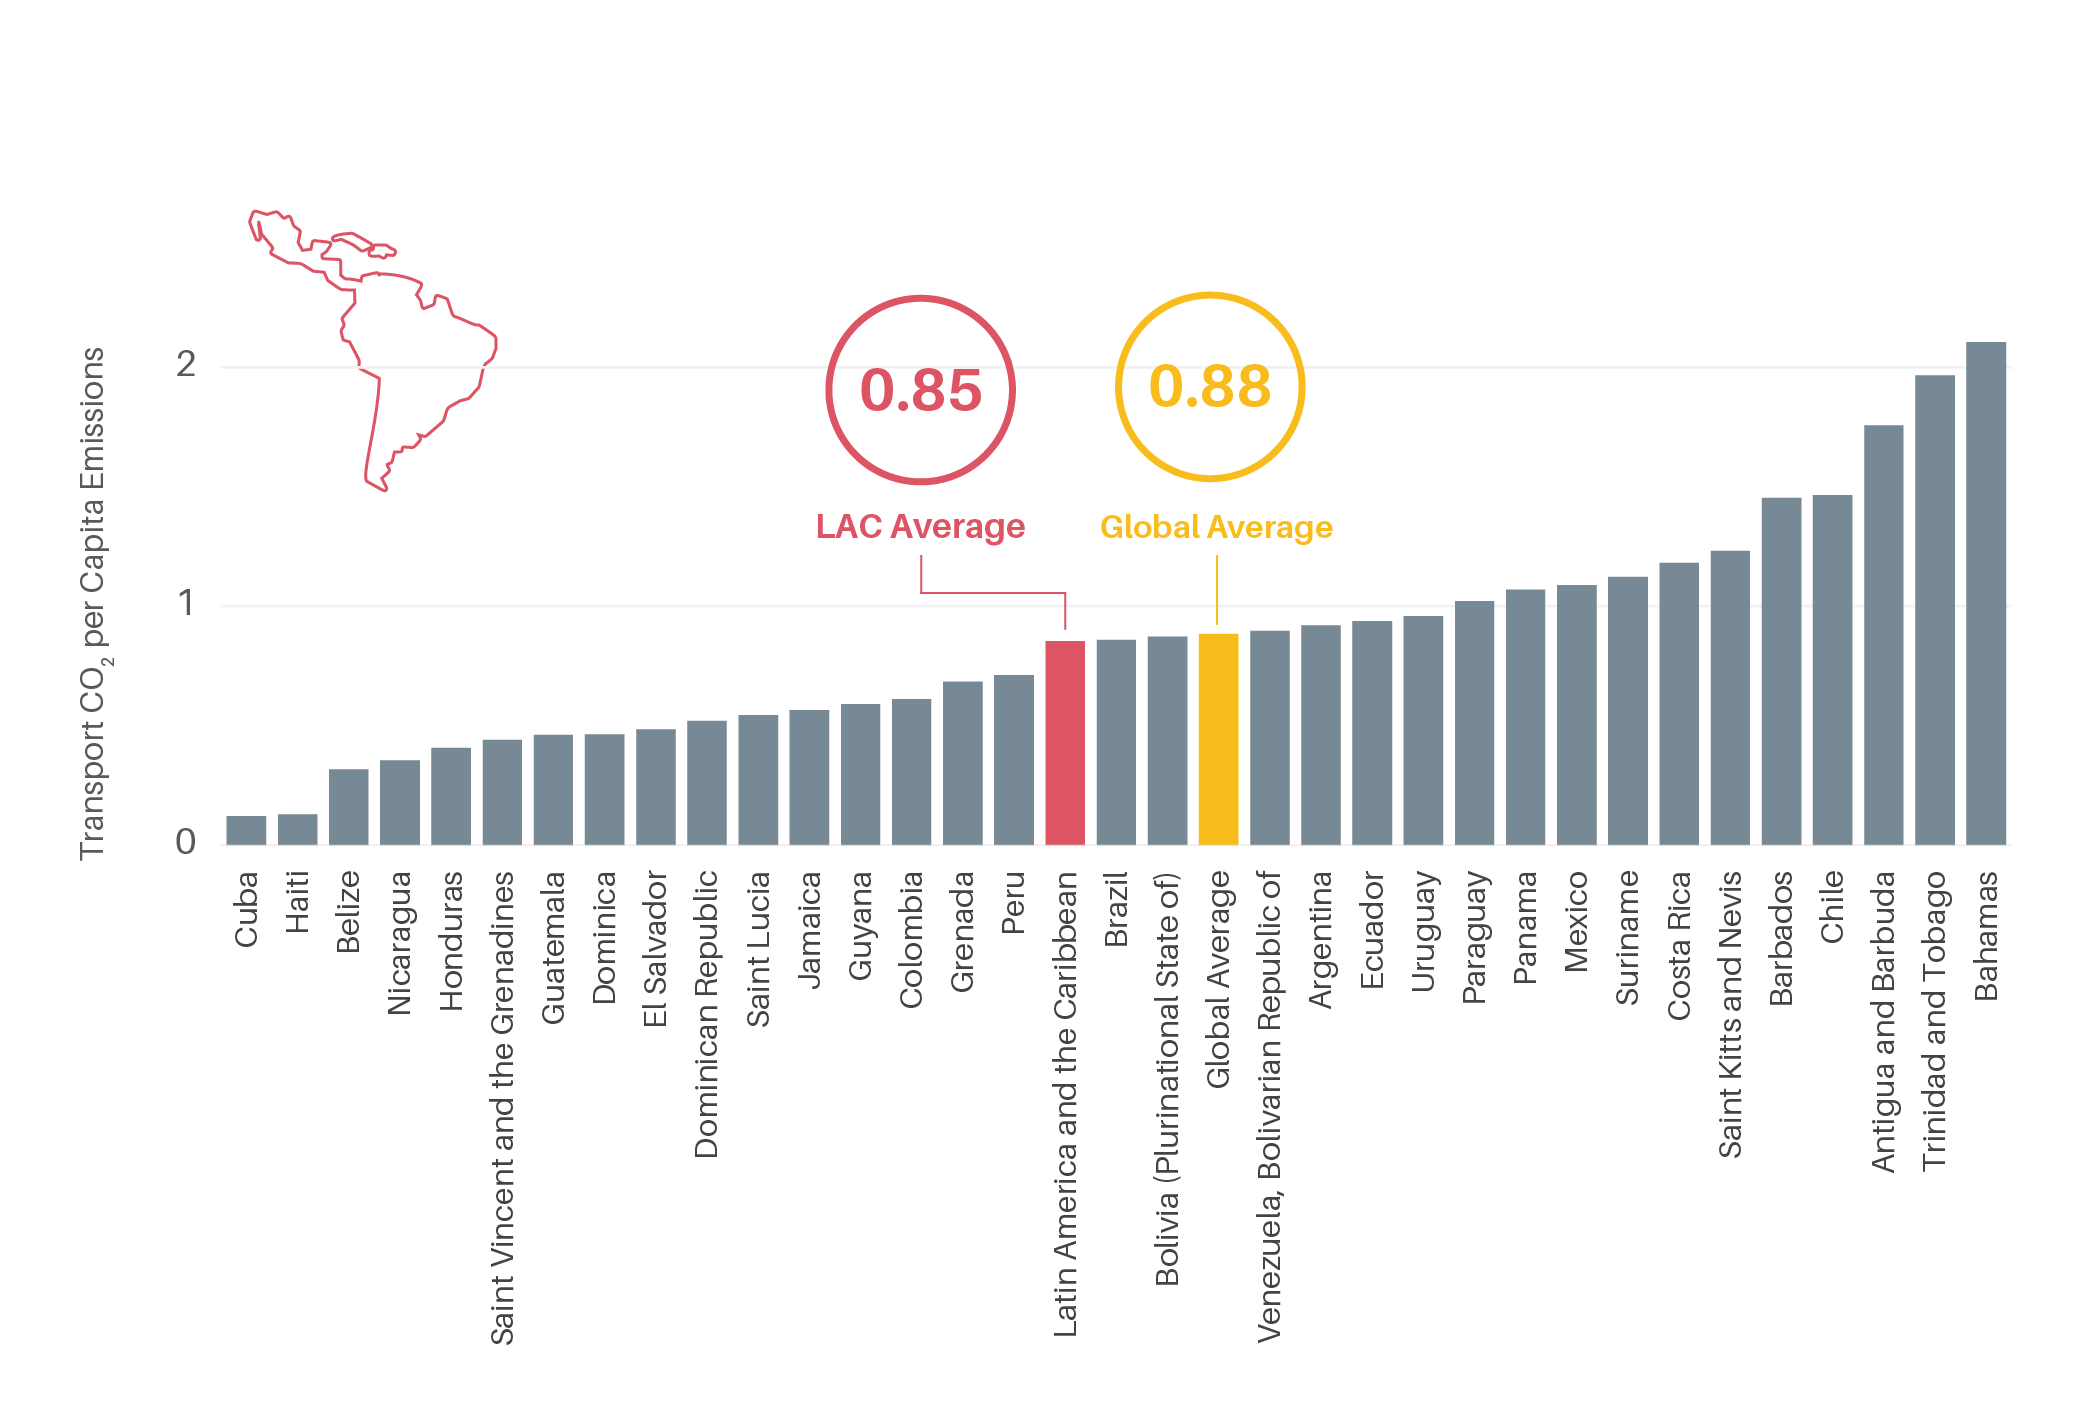 Per capita transport CO2 emissions in Latin America and the Caribbean, 2019